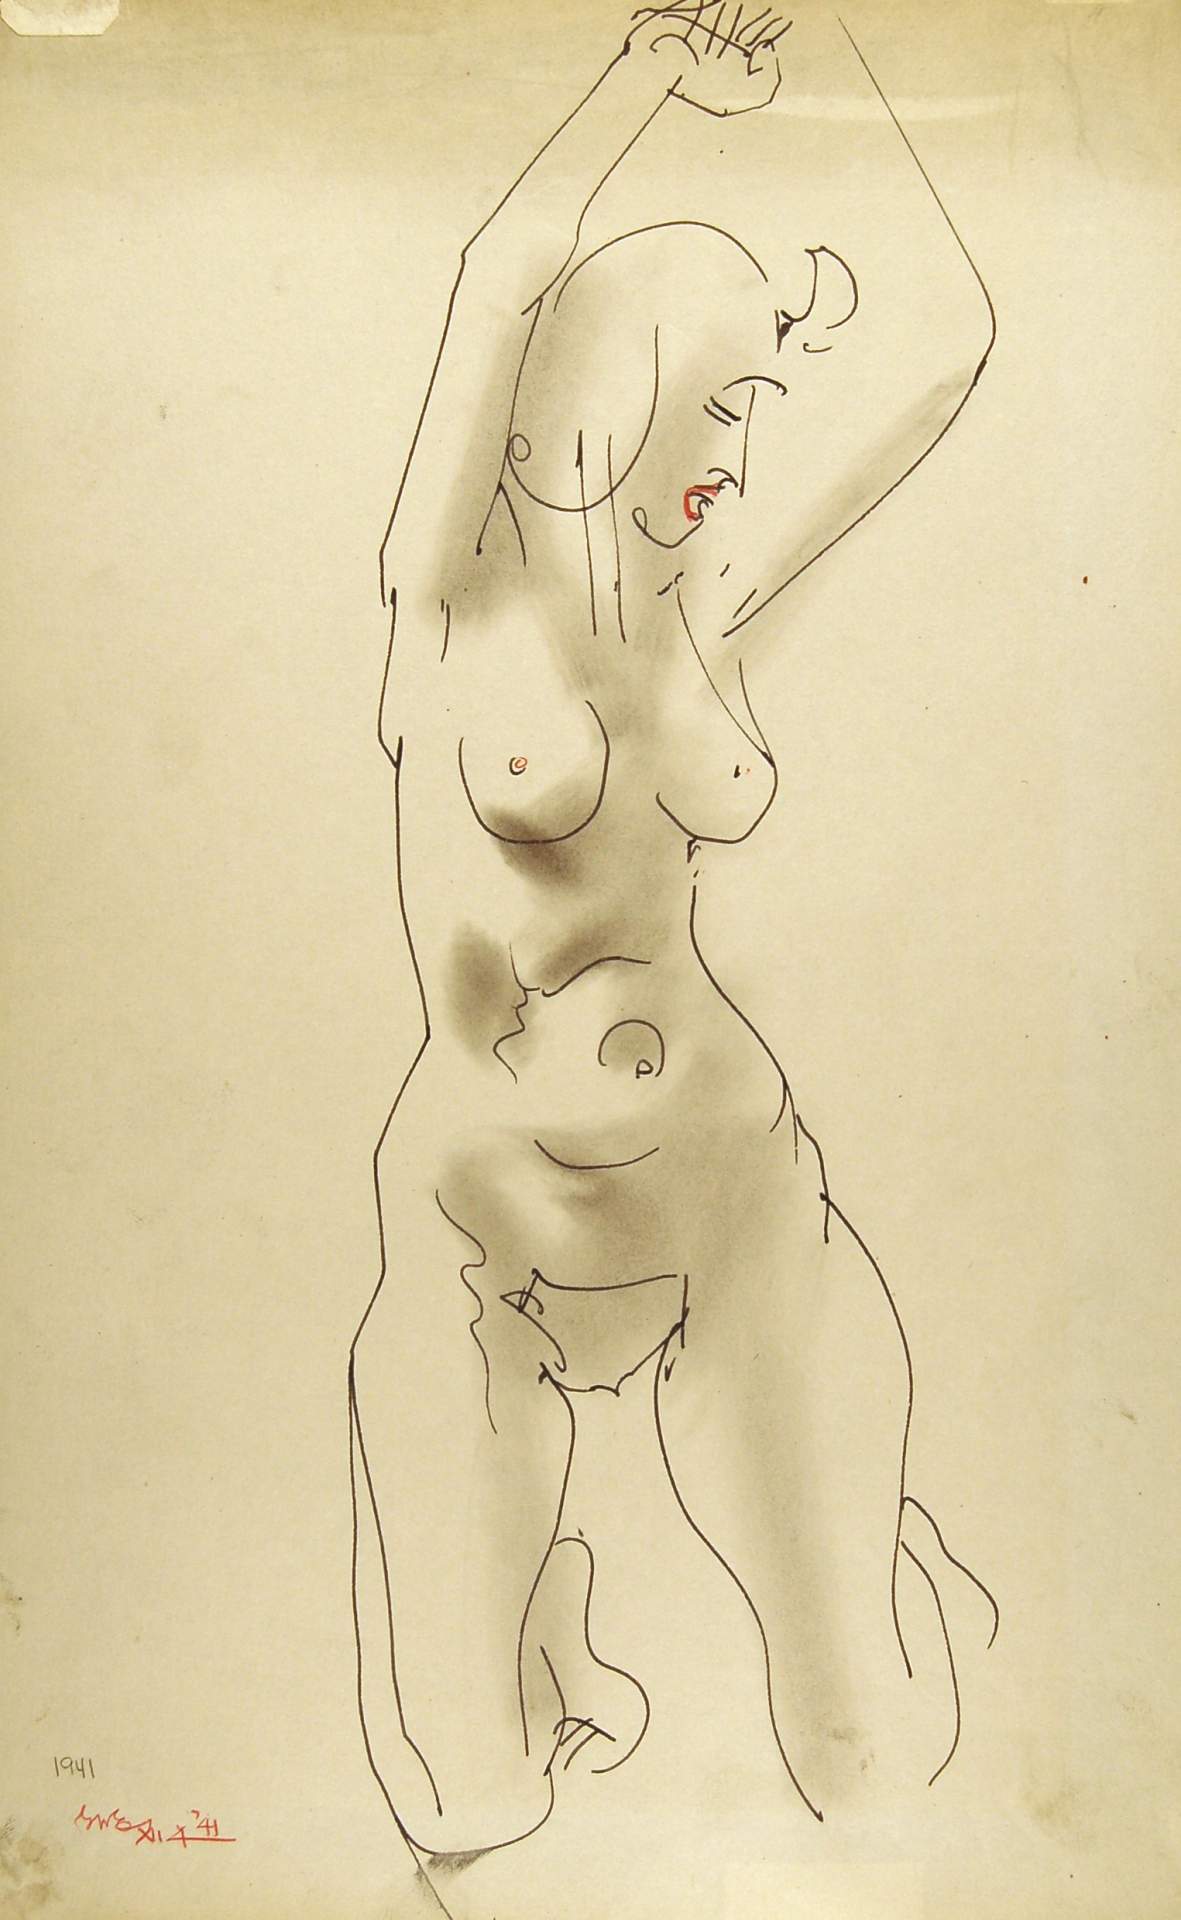 Kneeling Female Nude, Hands and Arms Overhead